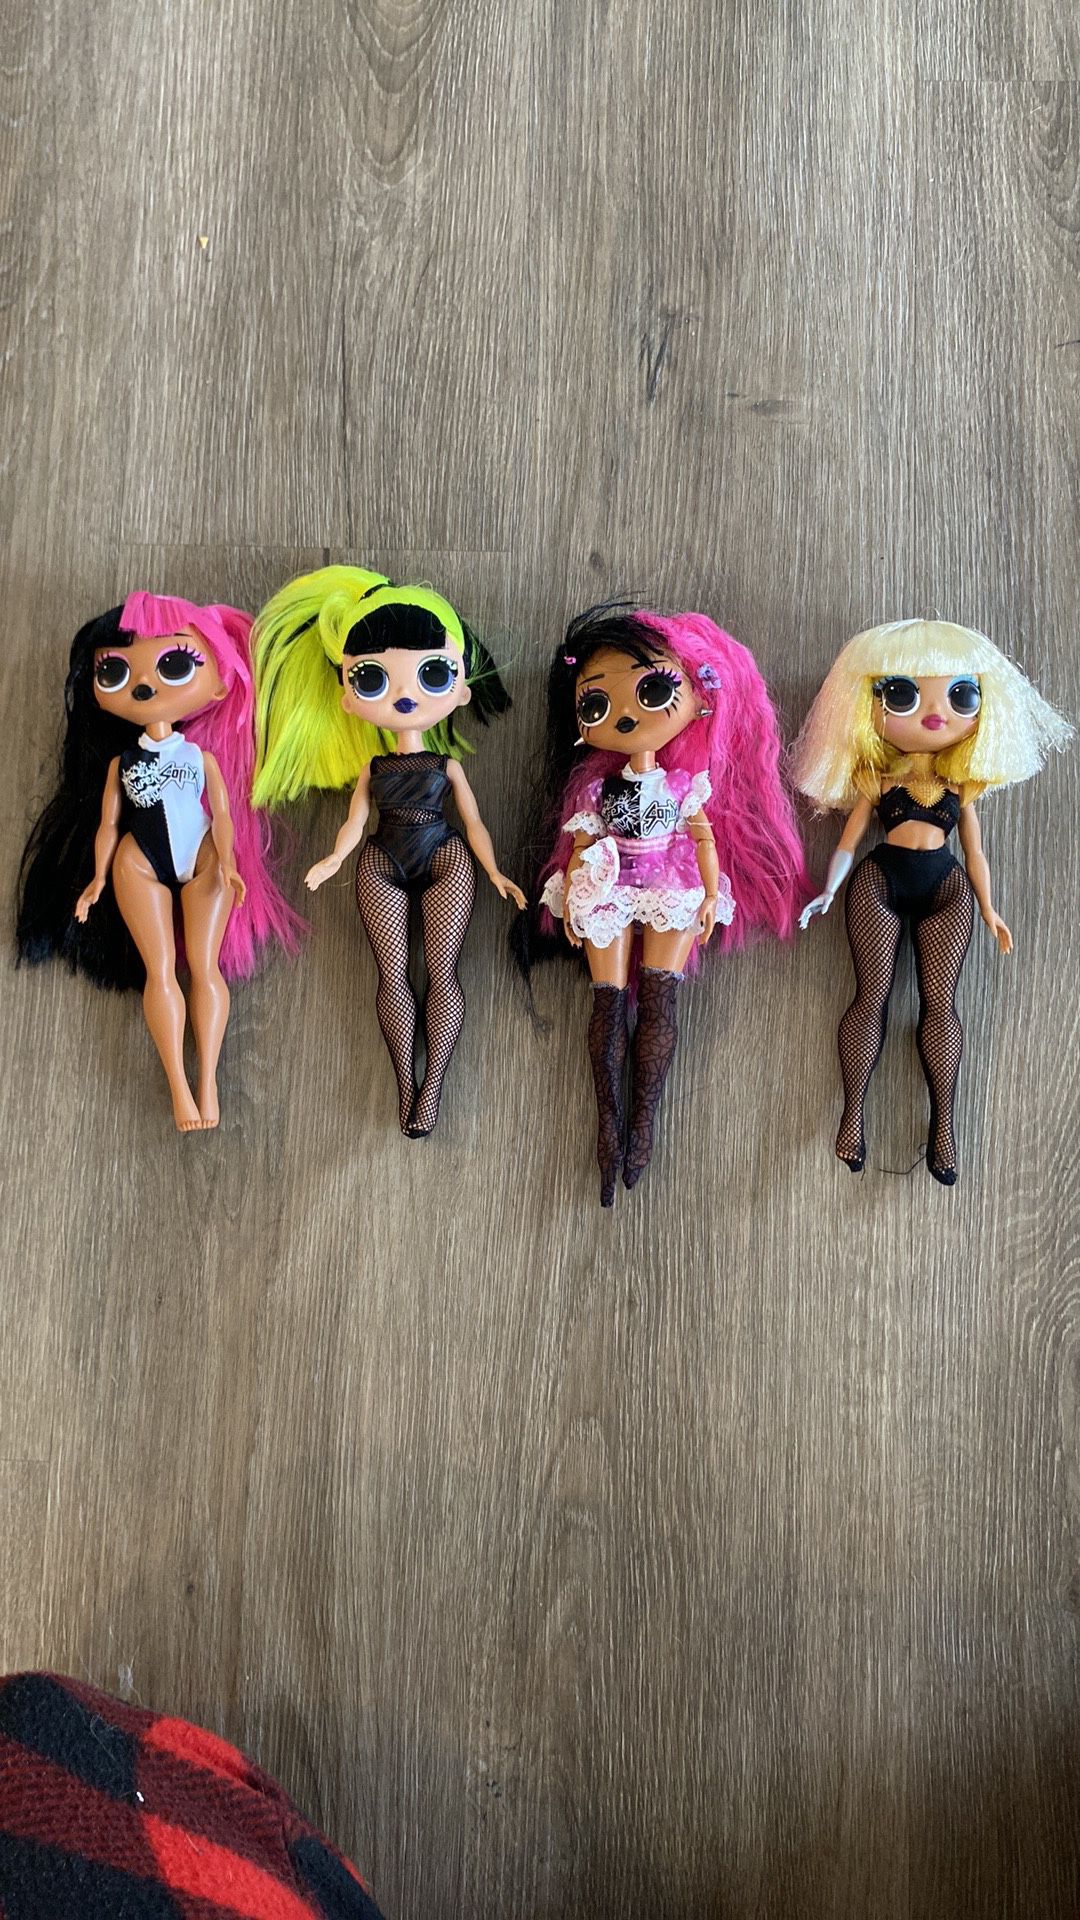 LOL Surprise Bhad Gurl Fame Queen Metal Chick Lot Of 4   In used condition. Please look at pictures carefully for condition  Dolls are missing some cl